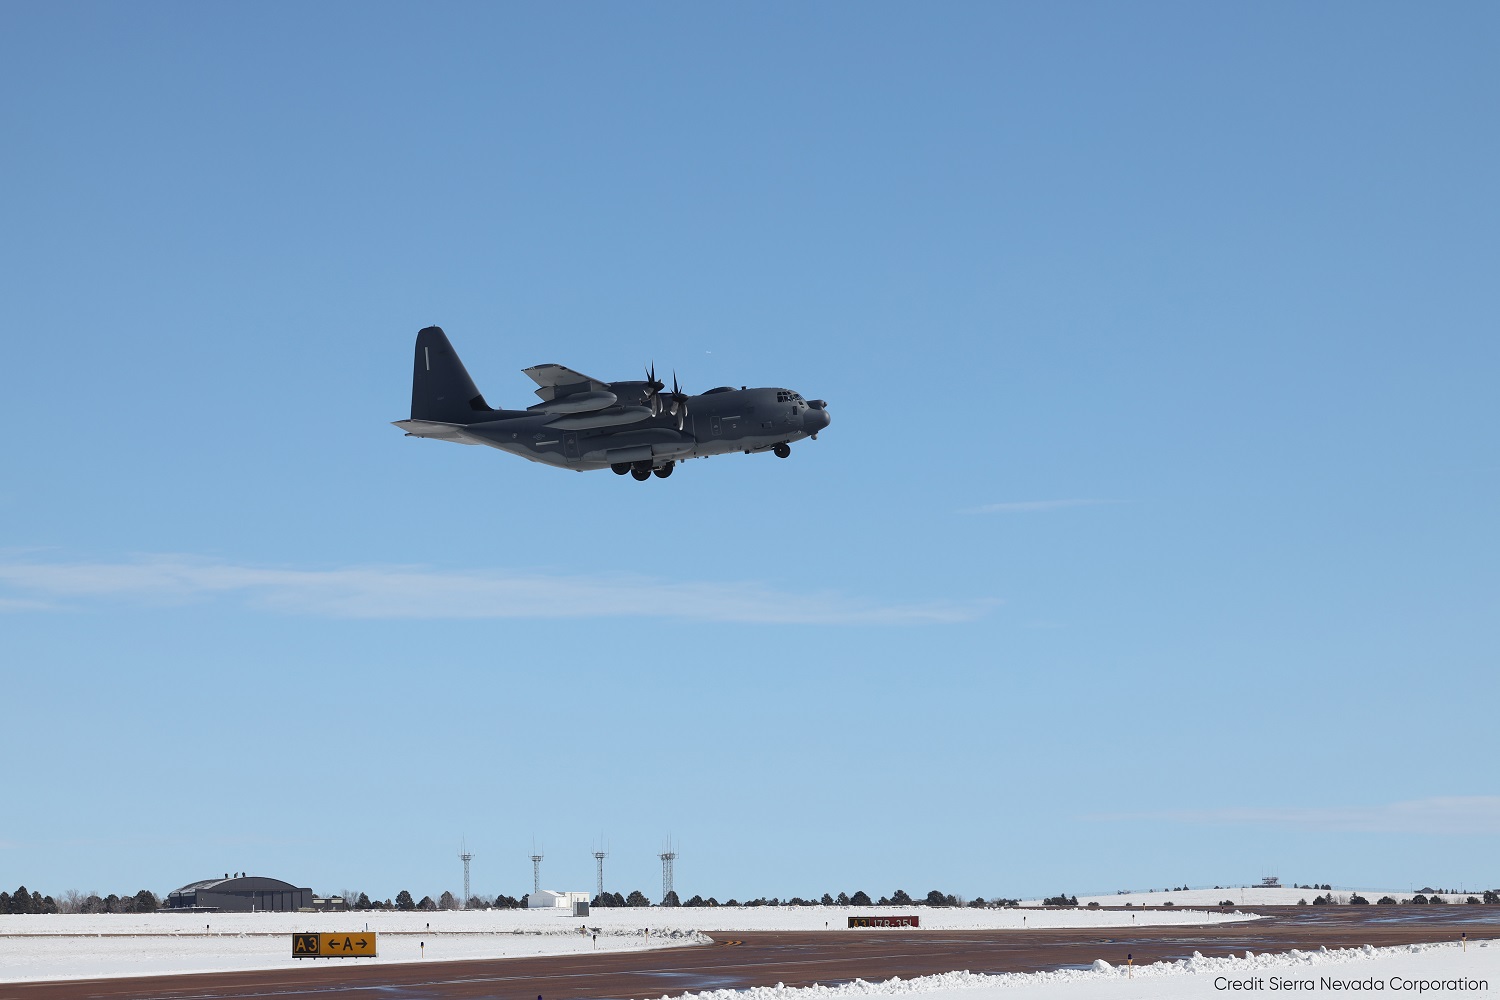 Sierra Nevada Corporation Delivers First AbMN-Modified MC-130J to AFSOC